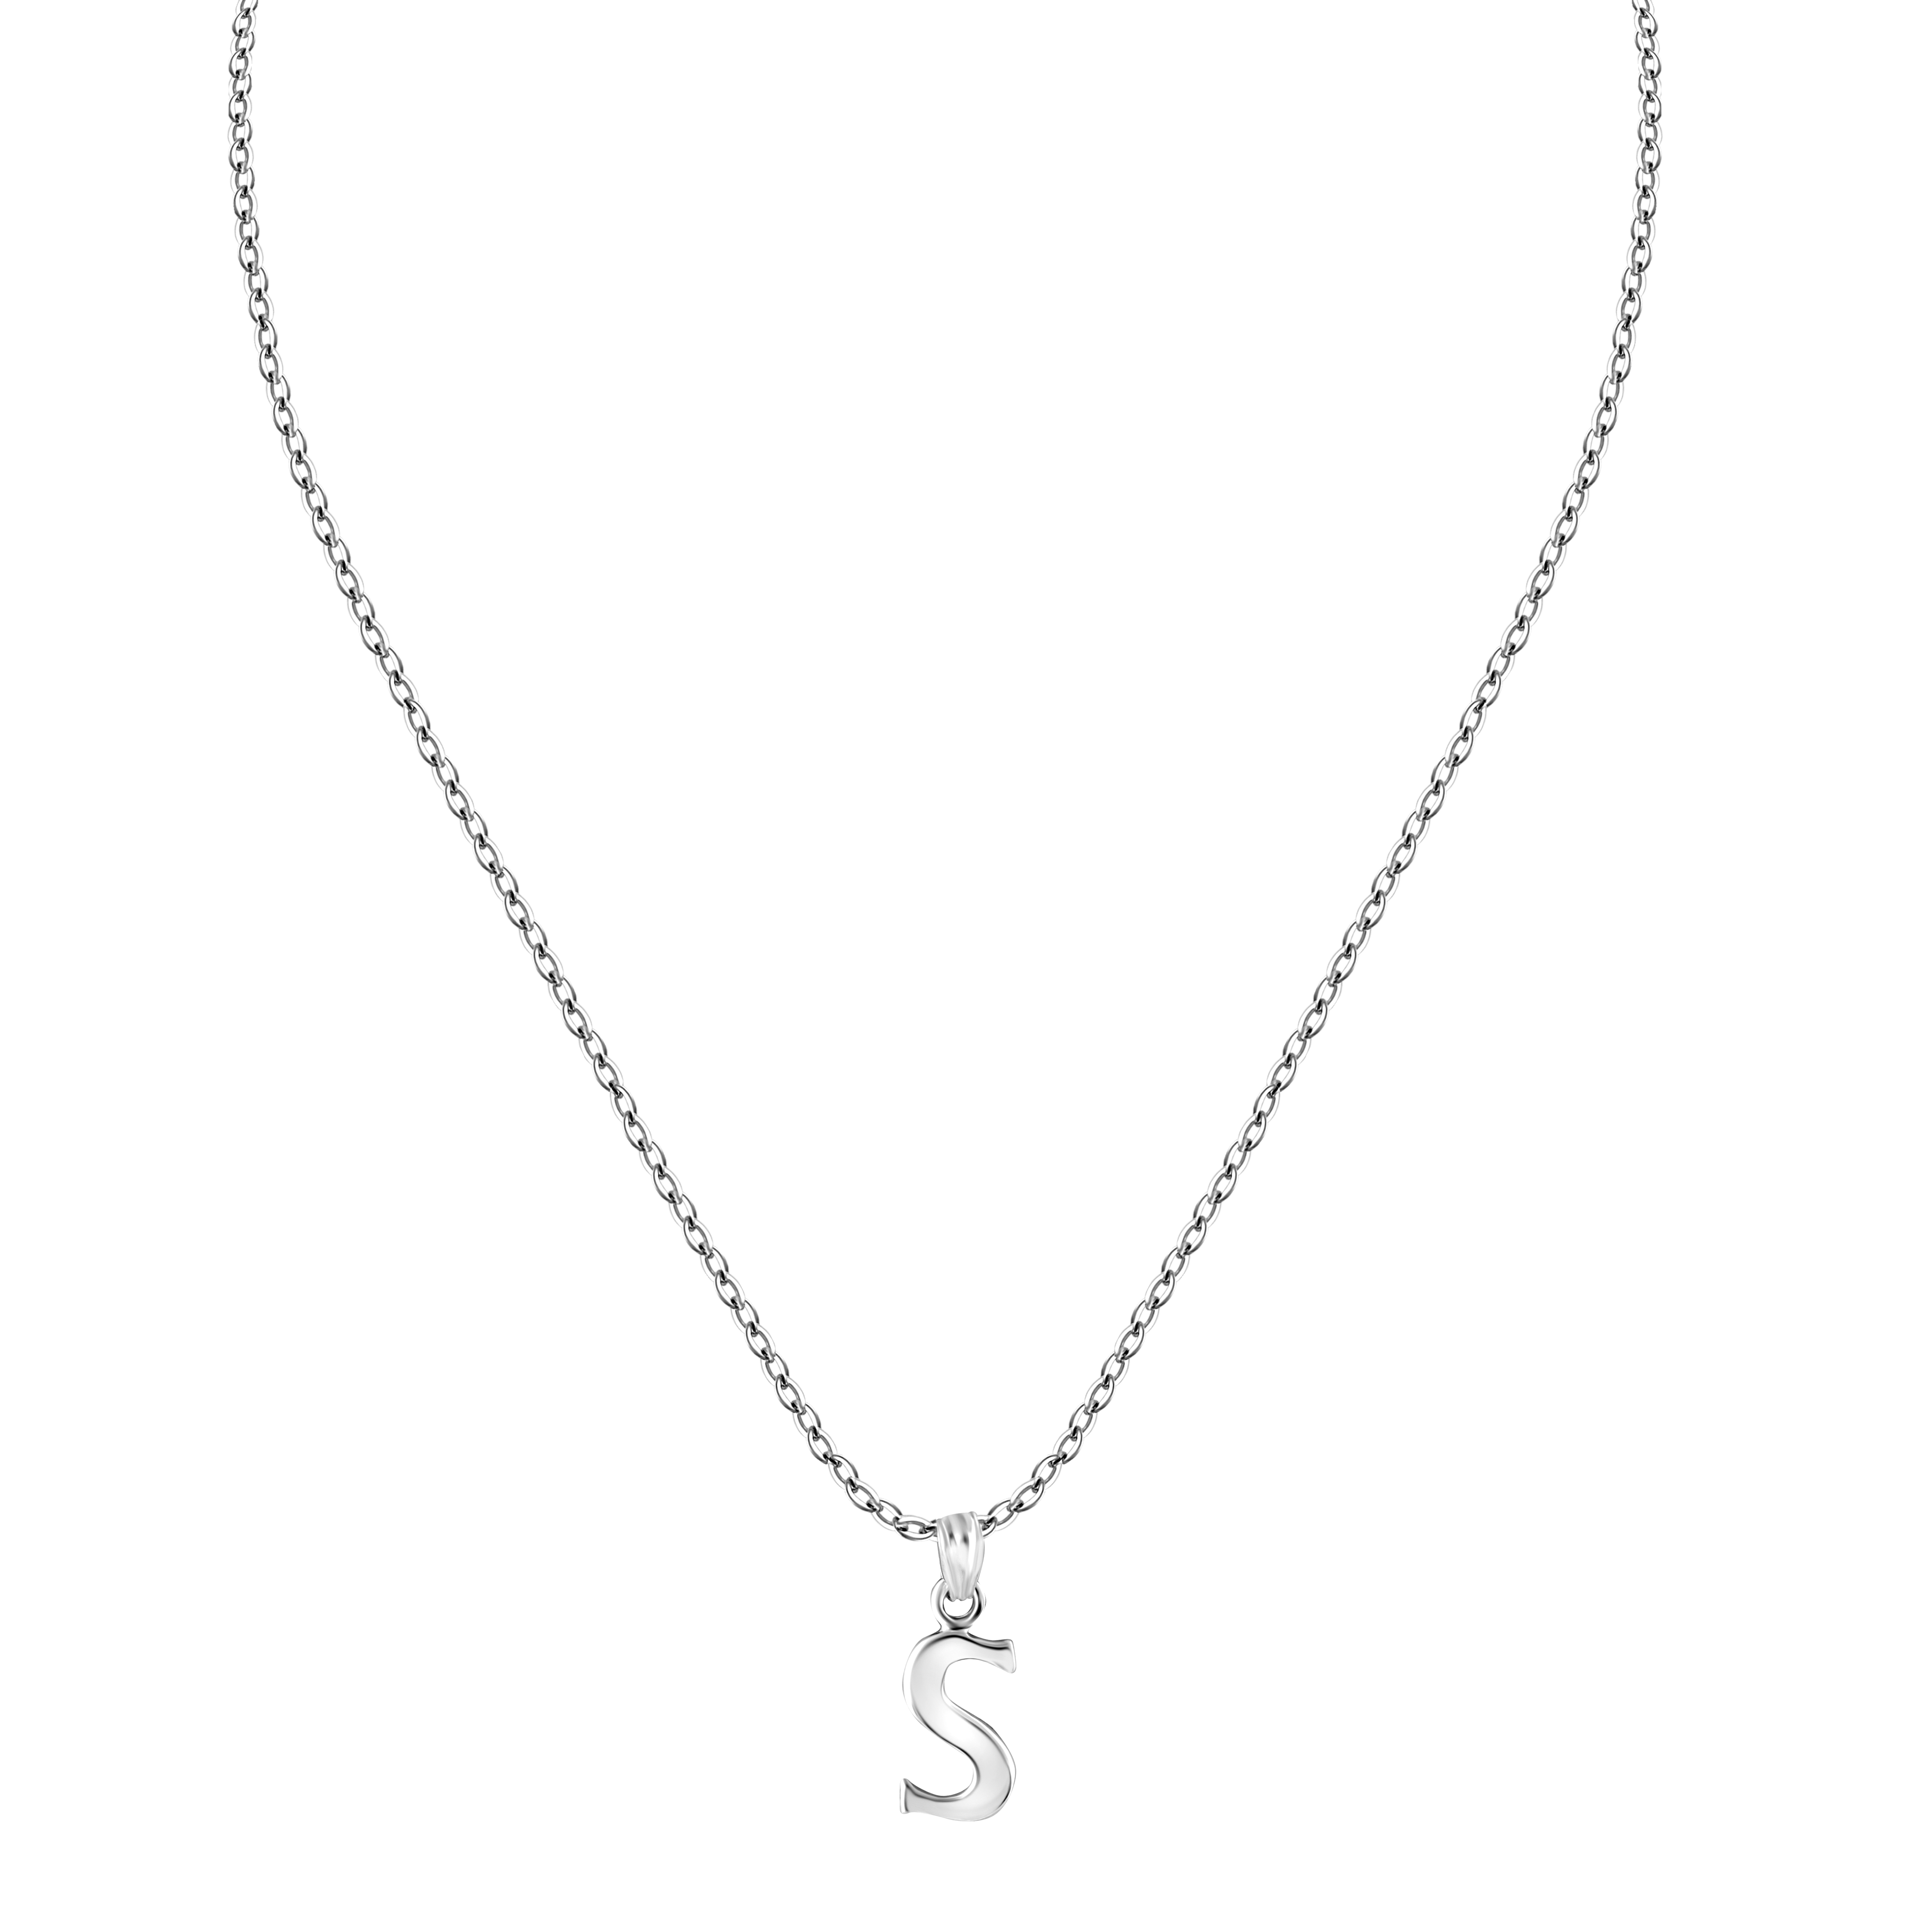 925 Sterling Silver 'S' Letter Pendant Necklace for Teen Women